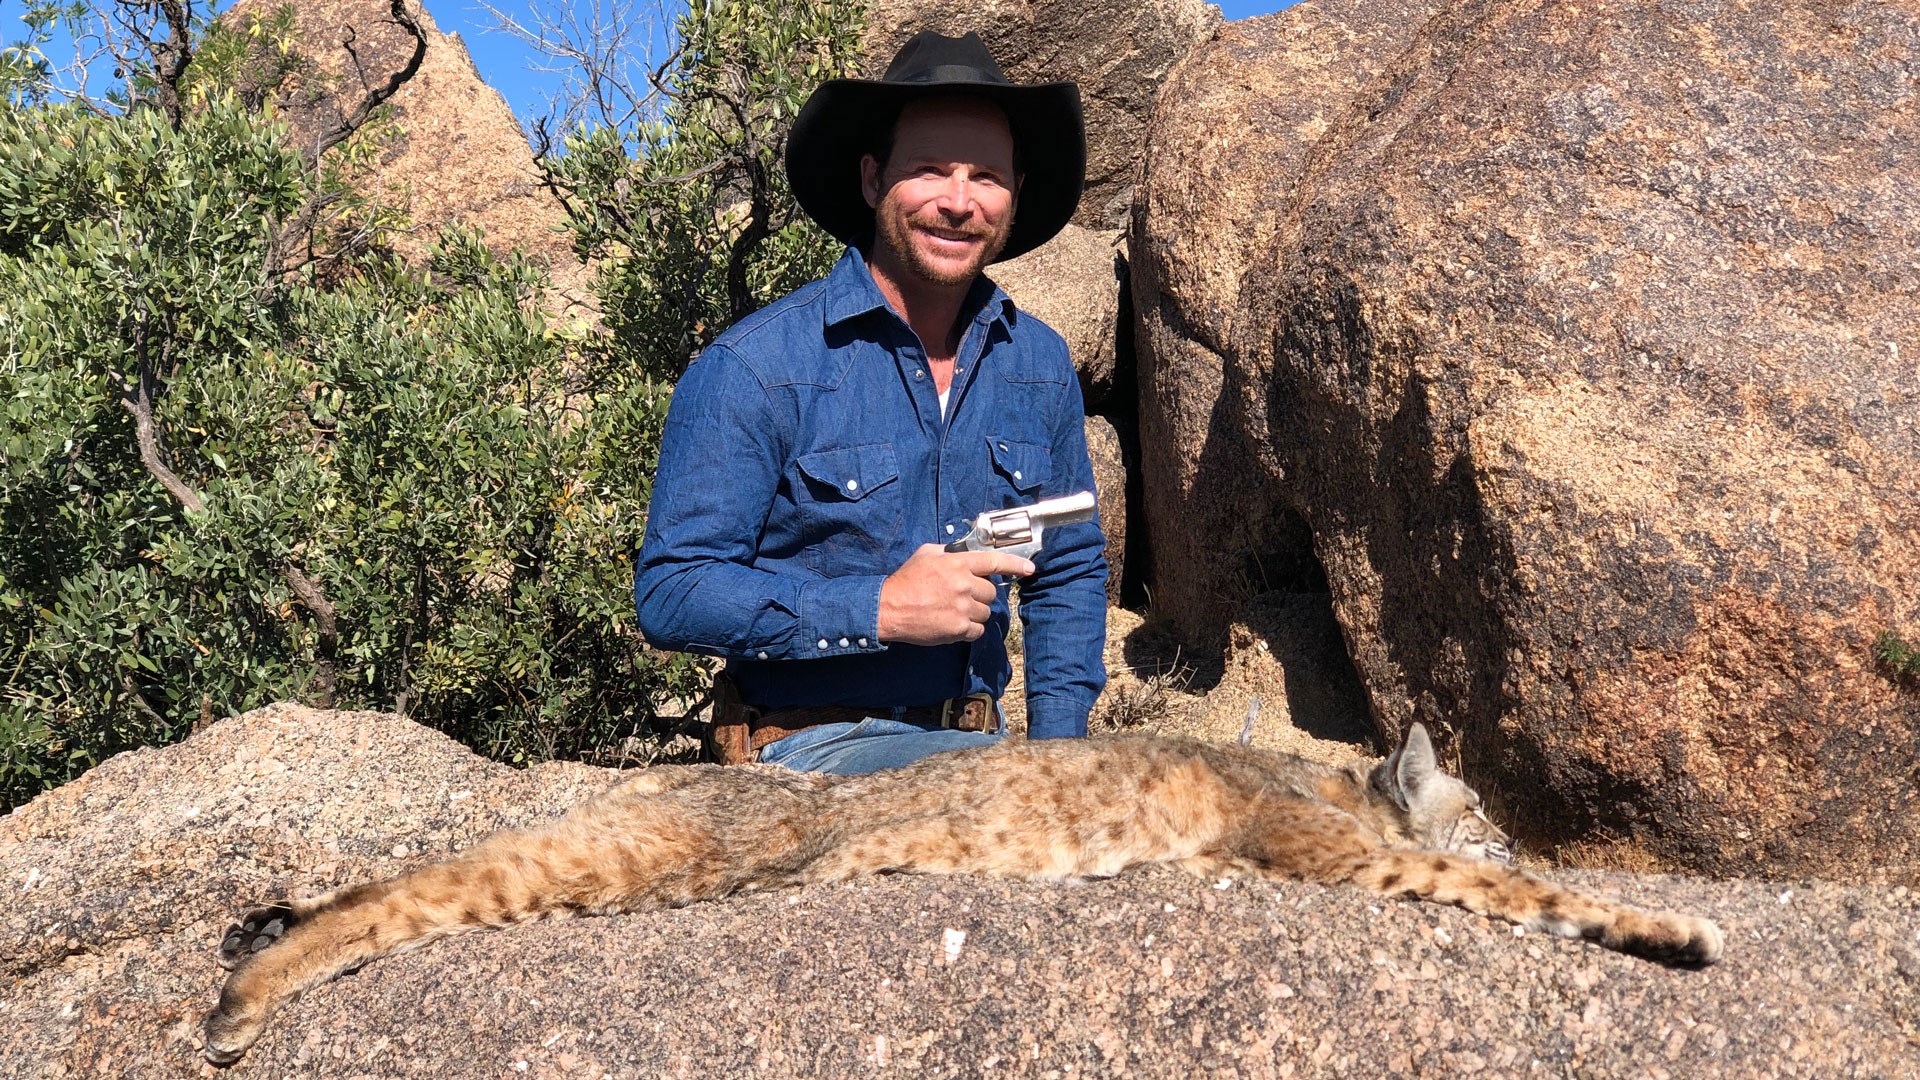 Author poses with pistol over bobcat